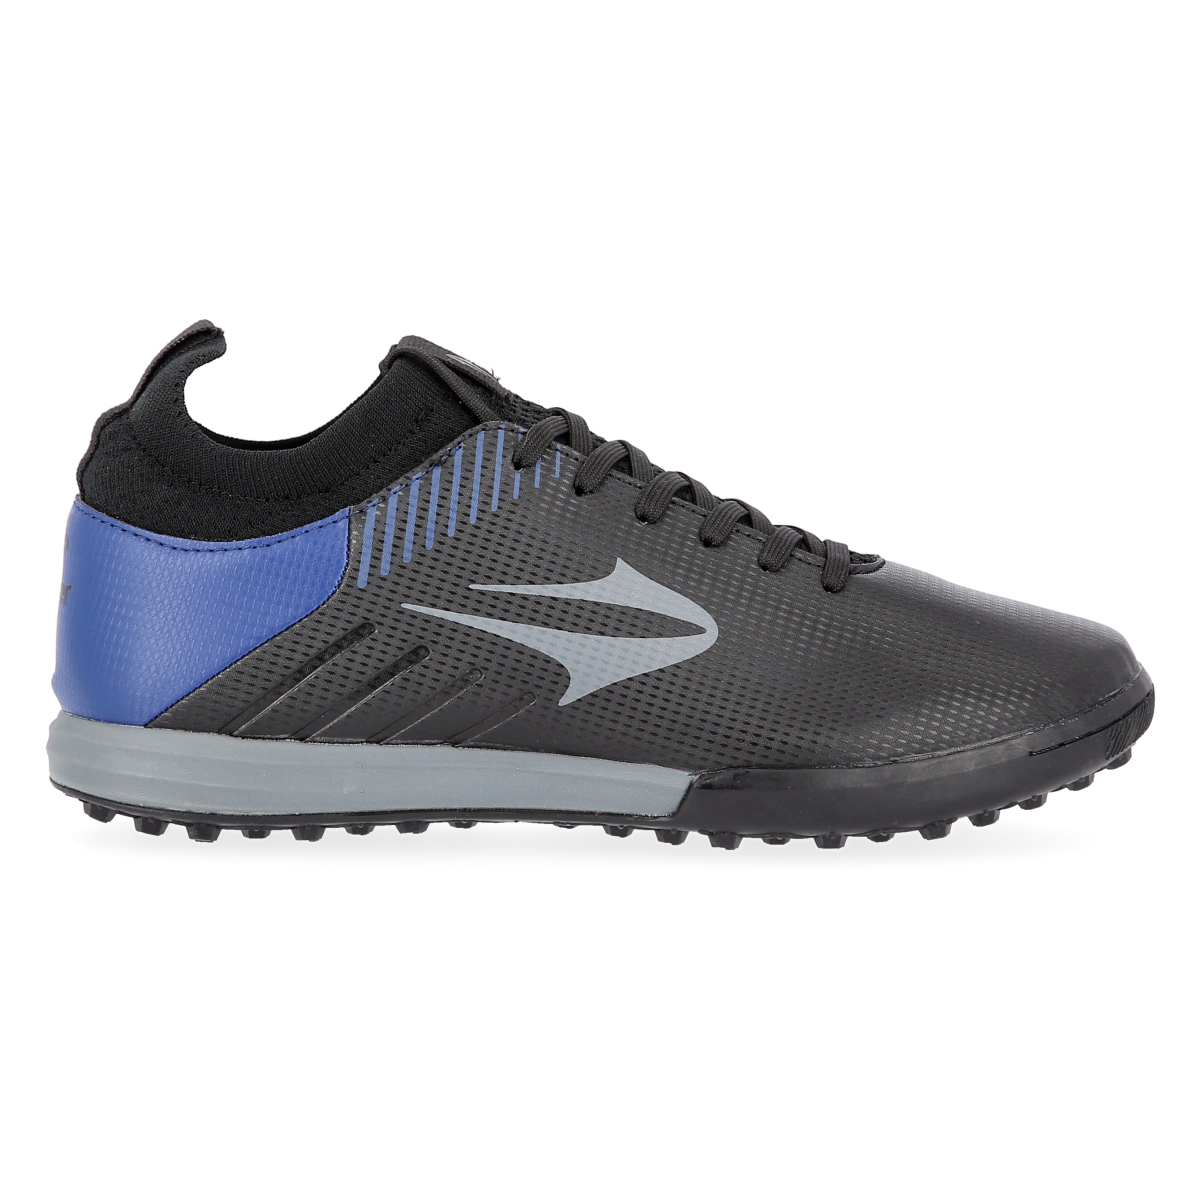 Botines Fútbol Topper Stingray Ii Mach 5 Tf Hombre,  image number null